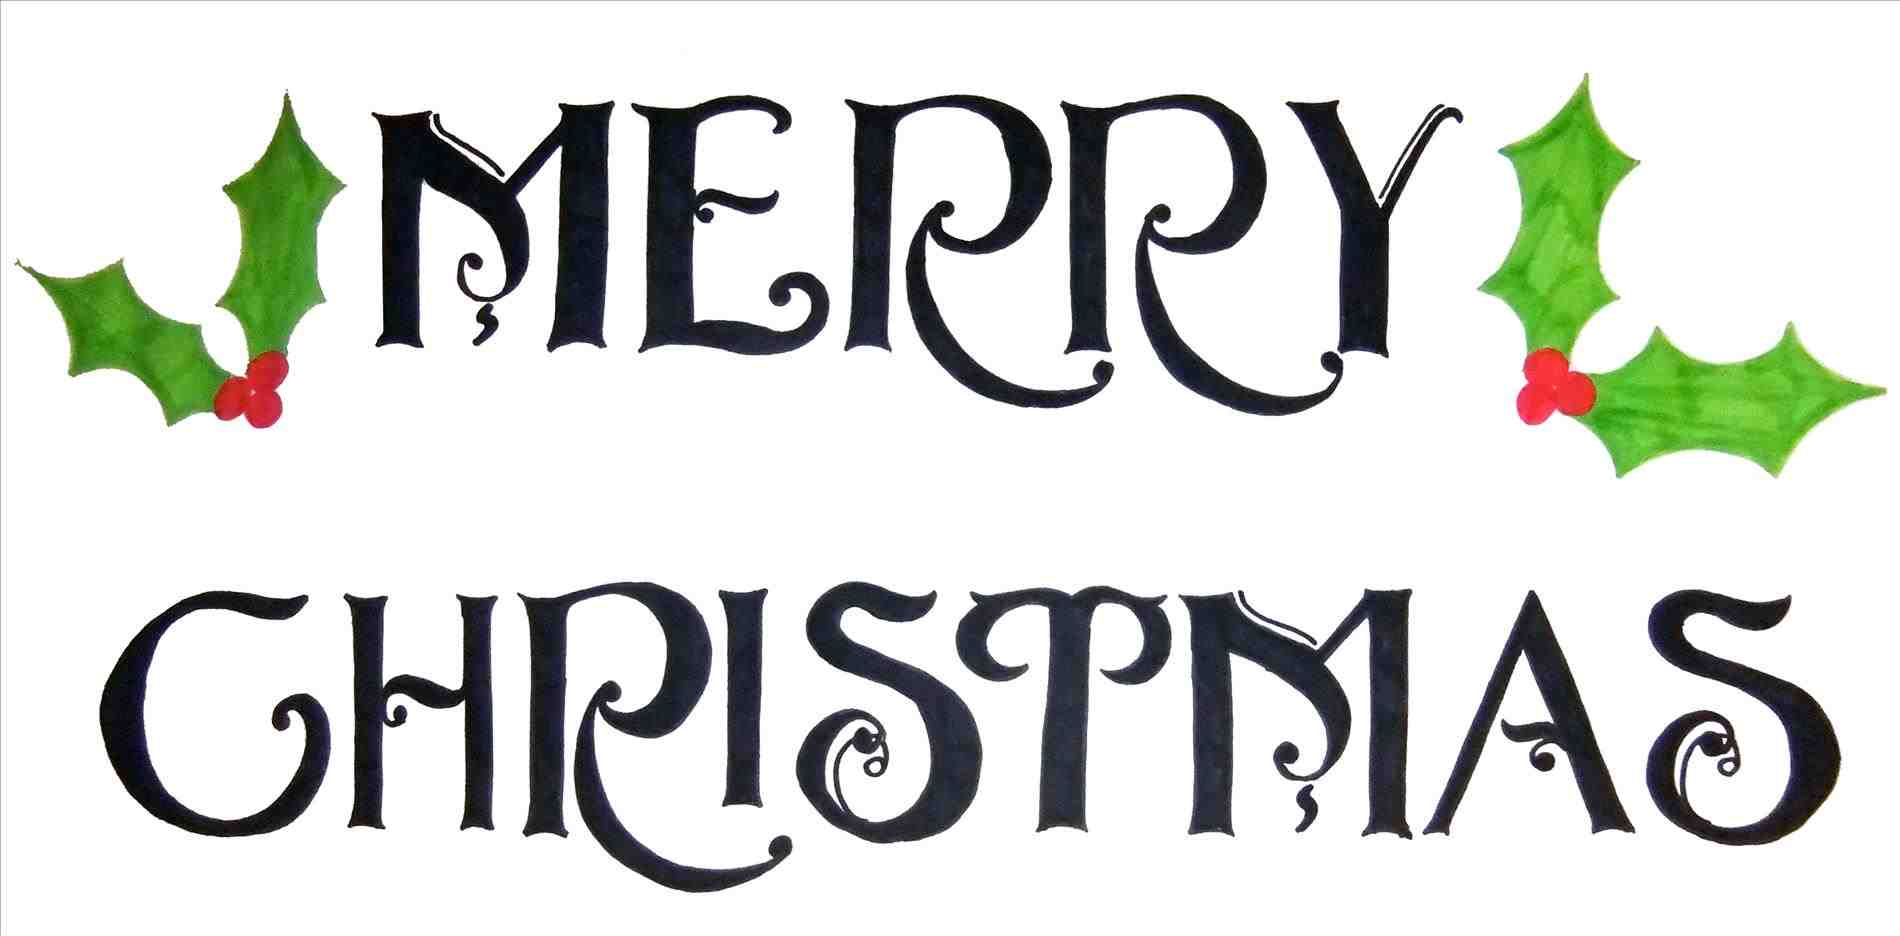 Merry Christmas And Happy New Year Clipart Free download